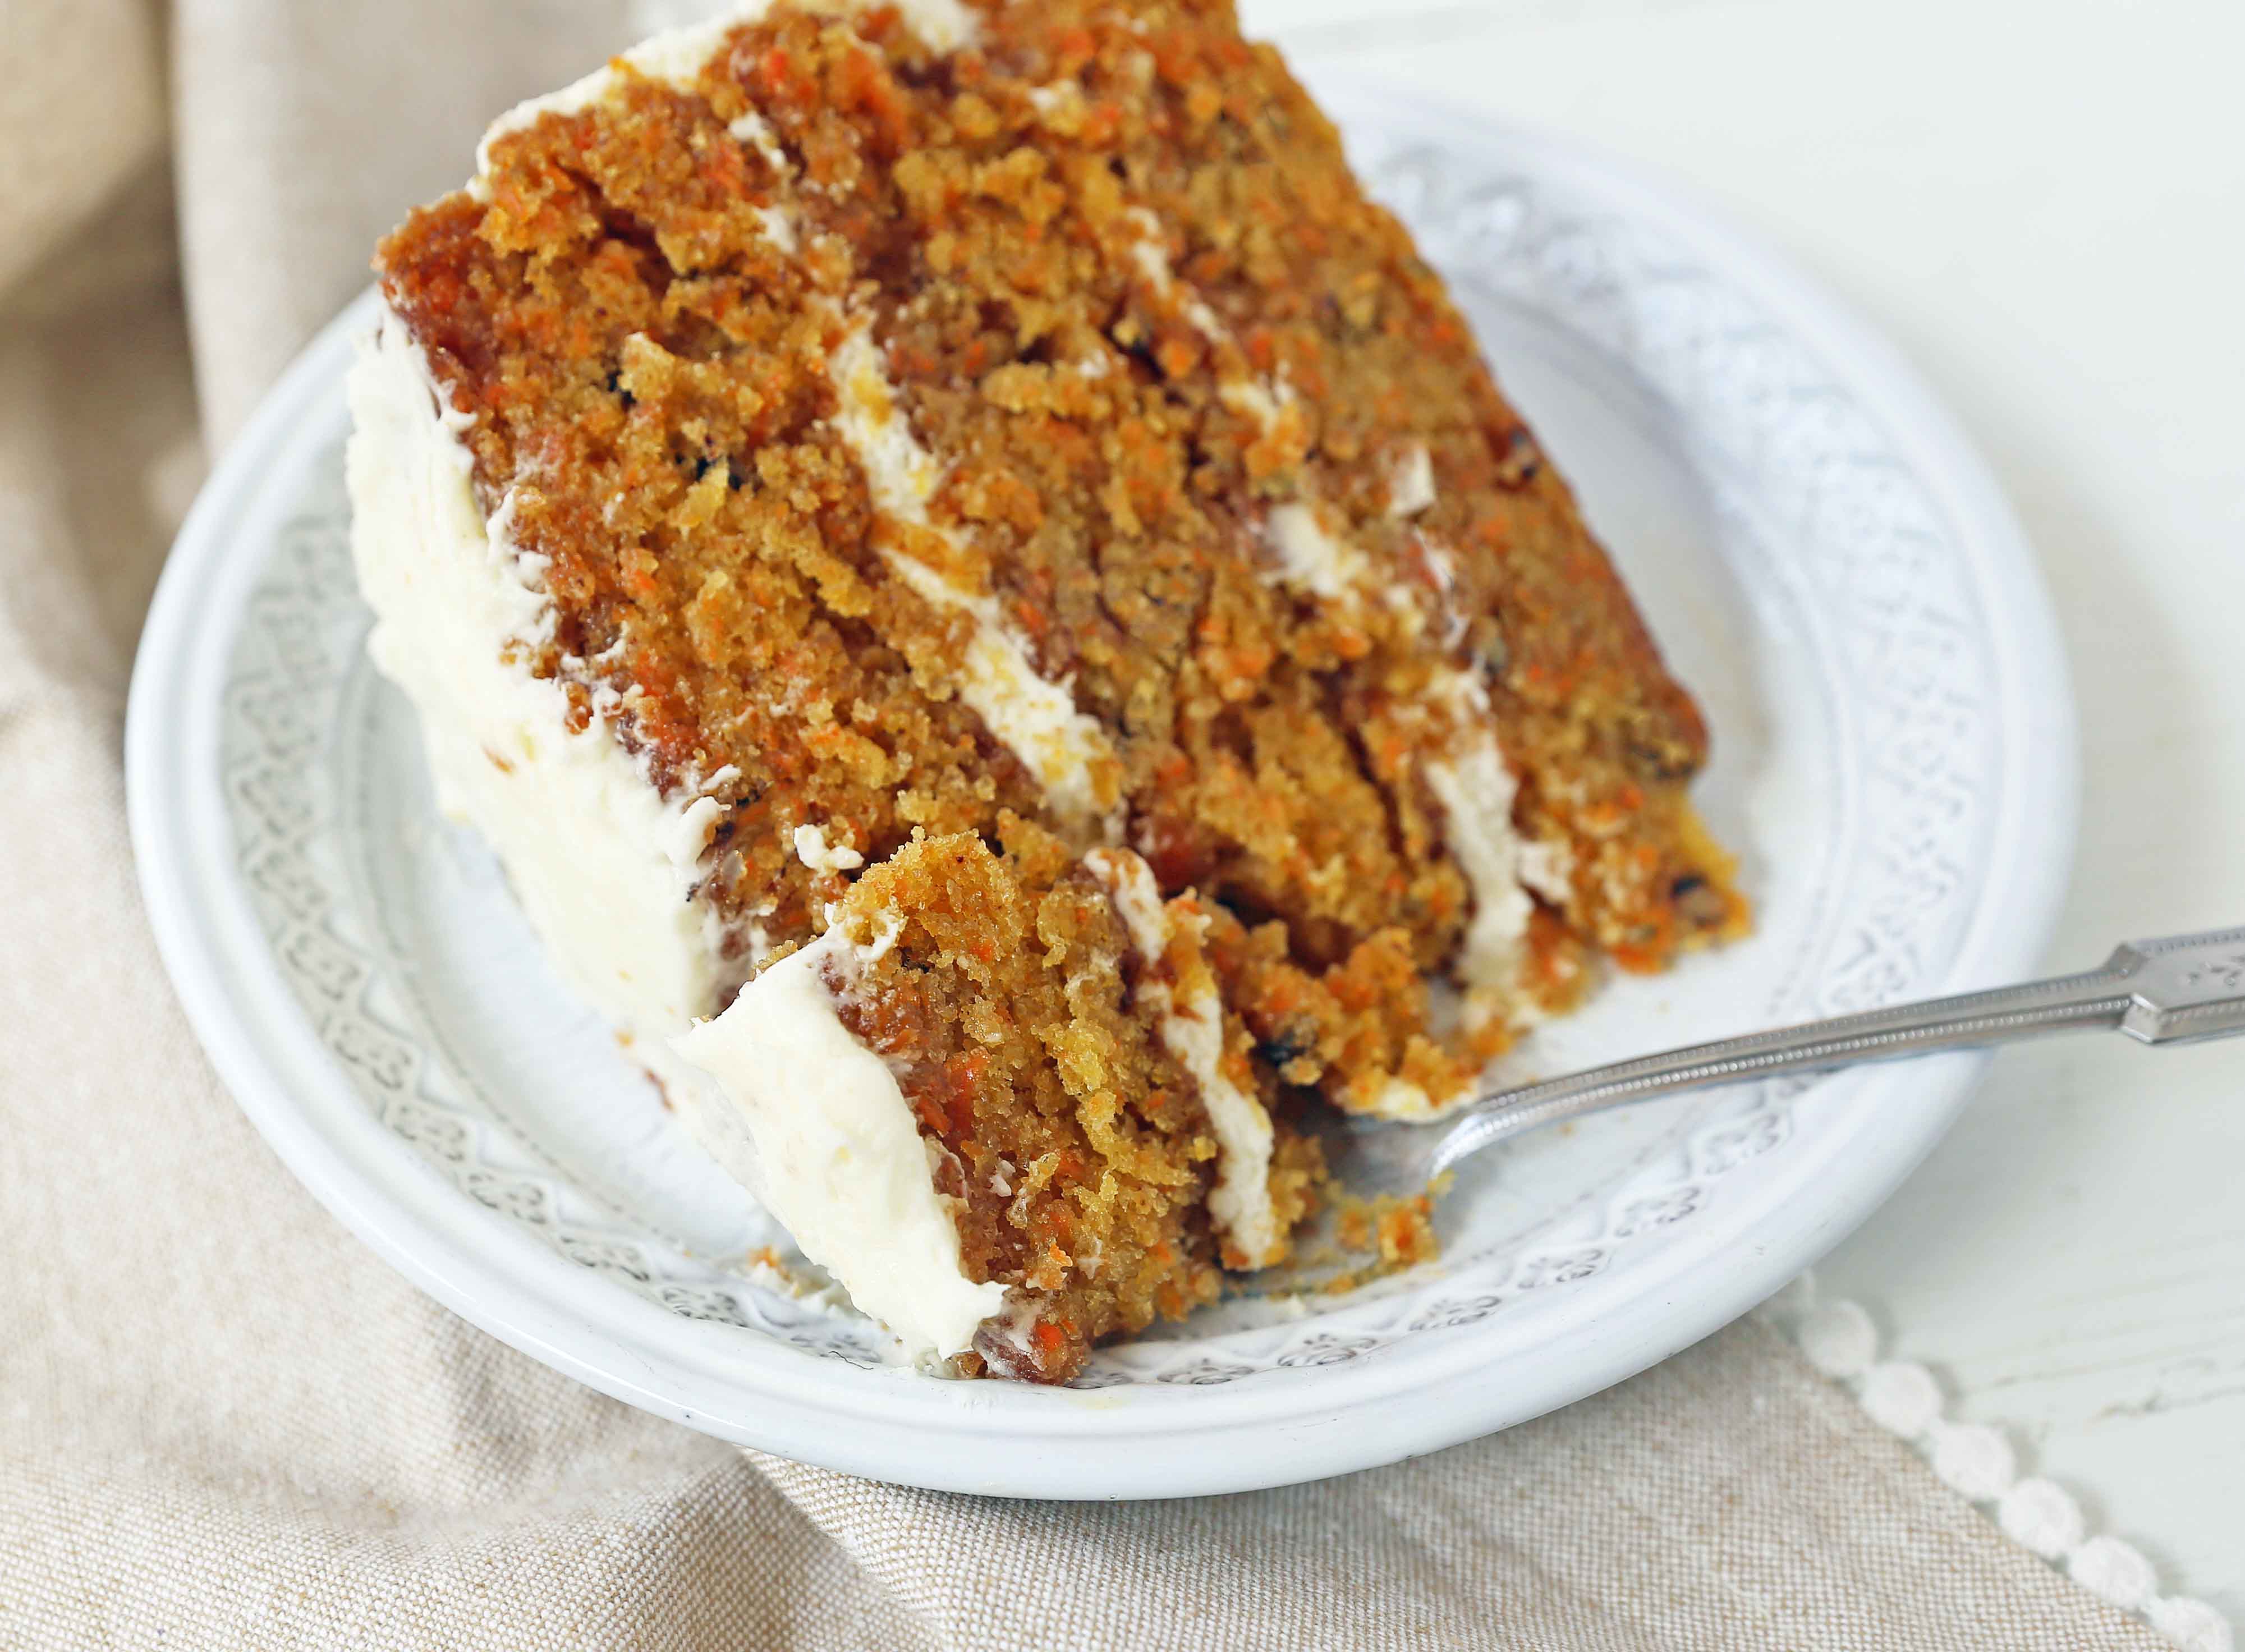 The Best Carrot Cake Recipe. A moist, tender carrot cake covered in a sweet cream cheese frosting. The perfect carrot cake recipe! #carrotcake #carrotcakerecipe #easter #easterrecipes